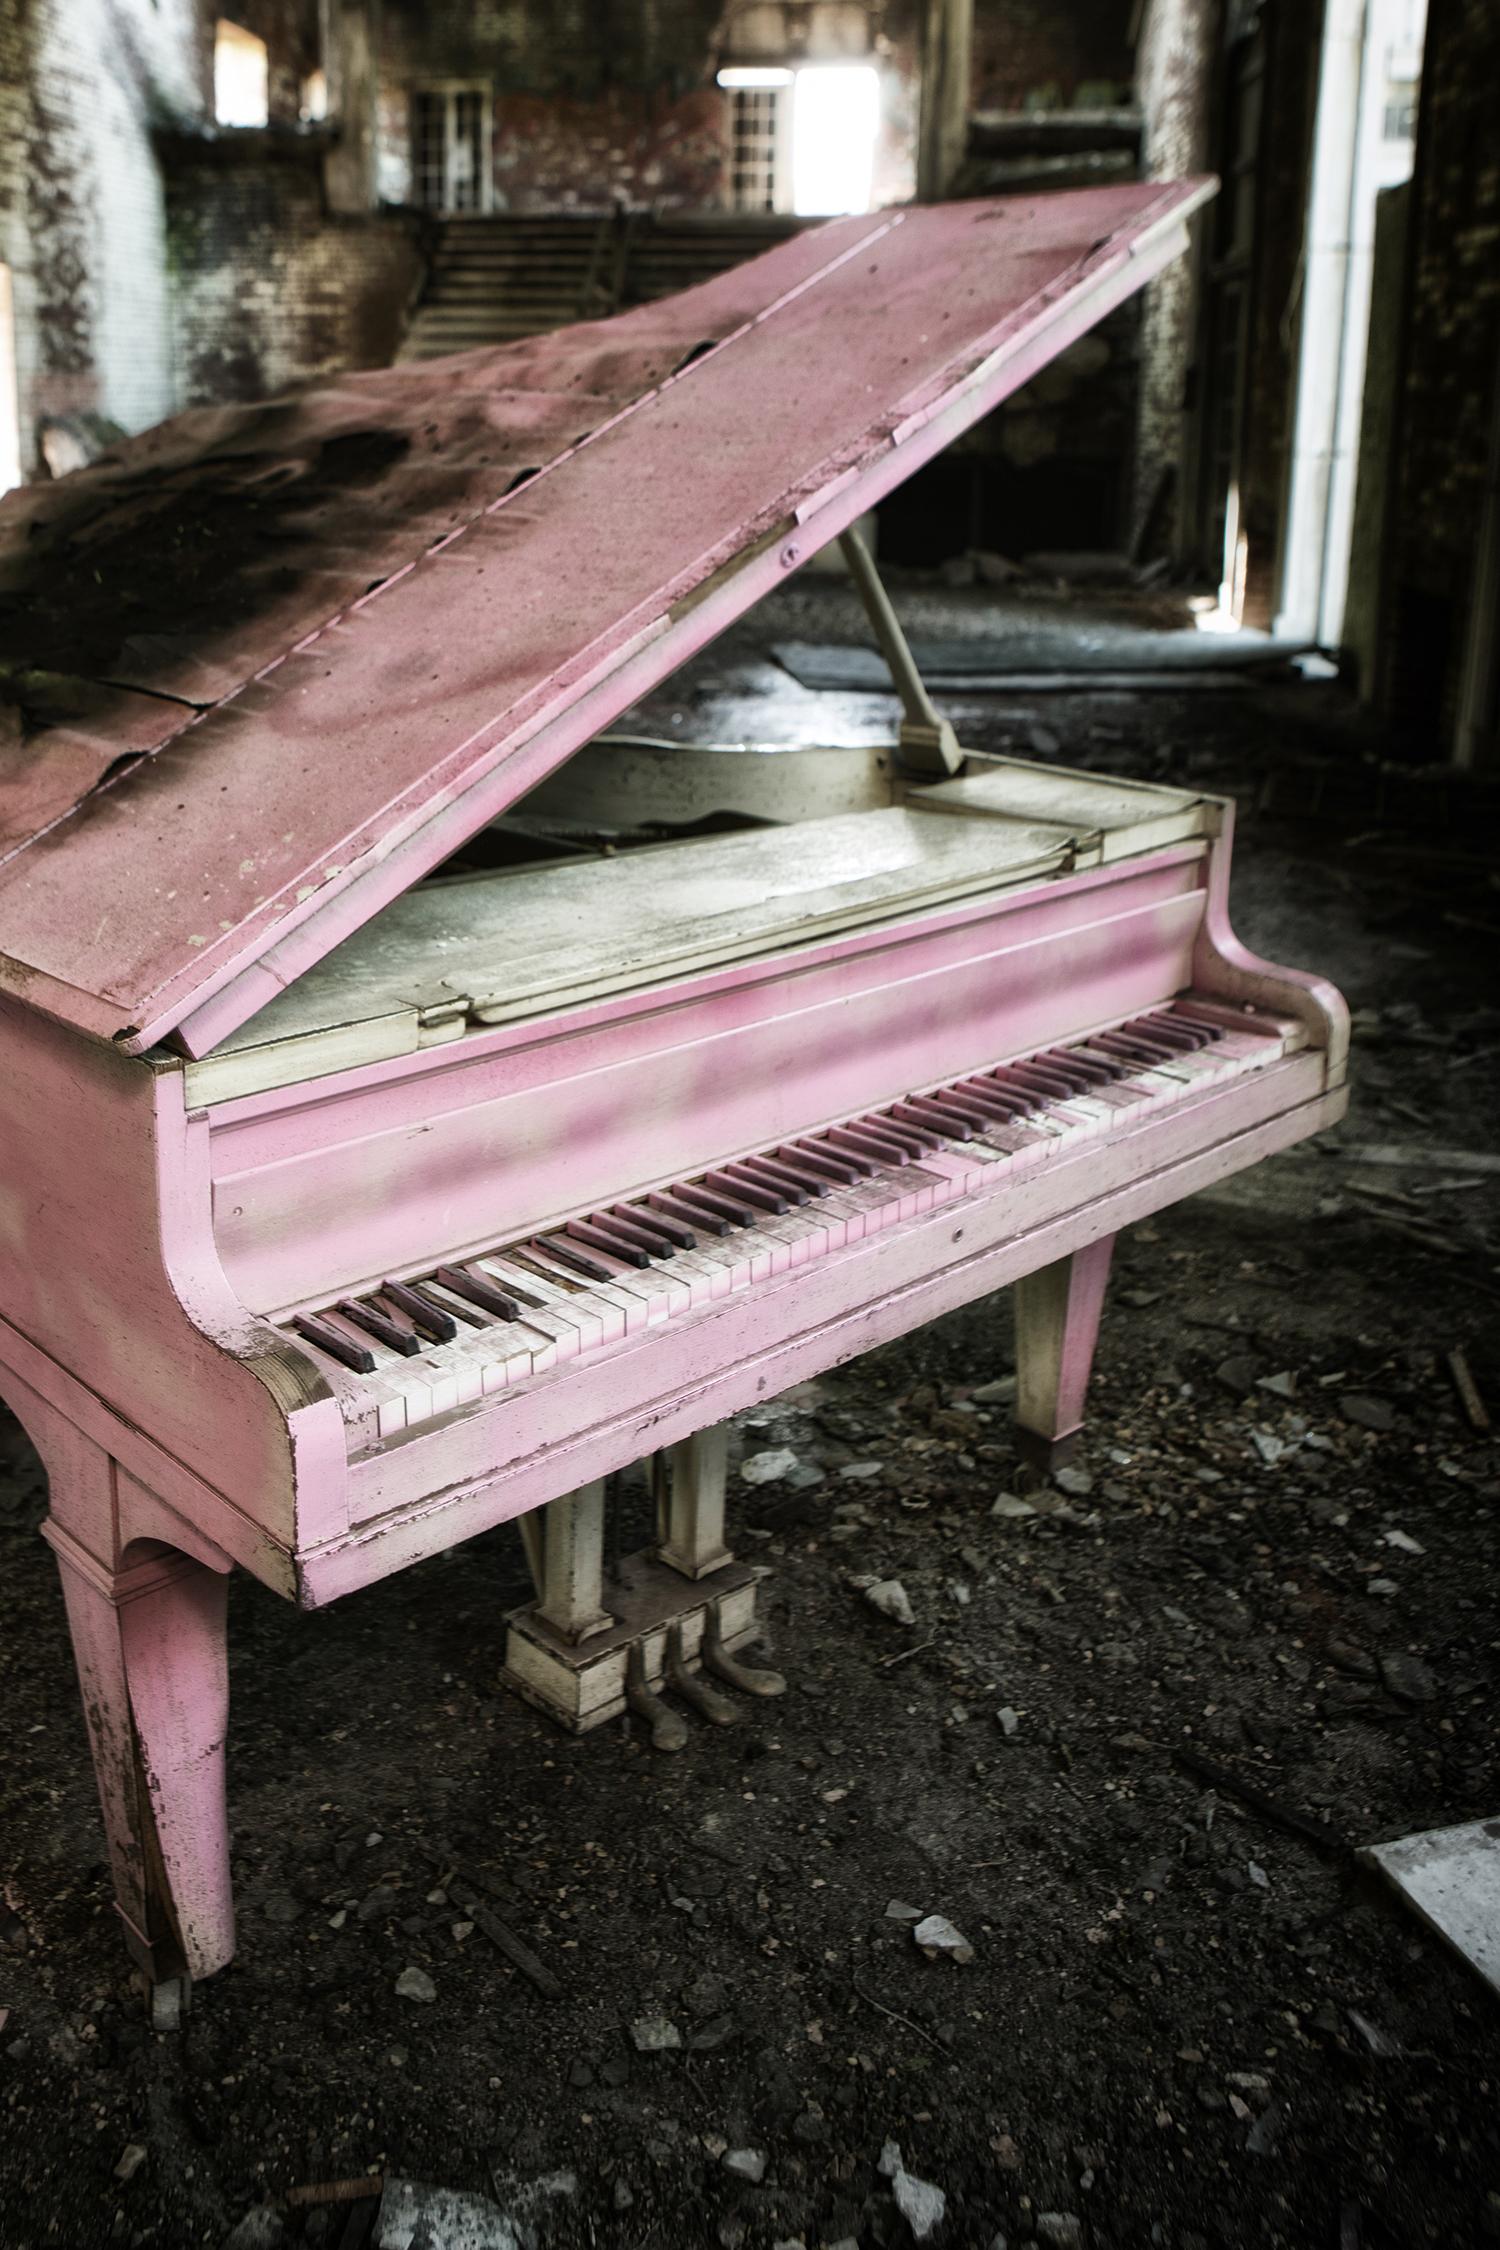 Rebecca Skinner’s “Concluded” is a 18 x 12 inch metal print of an abandoned pink piano located in the remnants of an auditorium in Indiana. We can only imagine the music that once played in this beautiful forgotten structure. The frameless print has